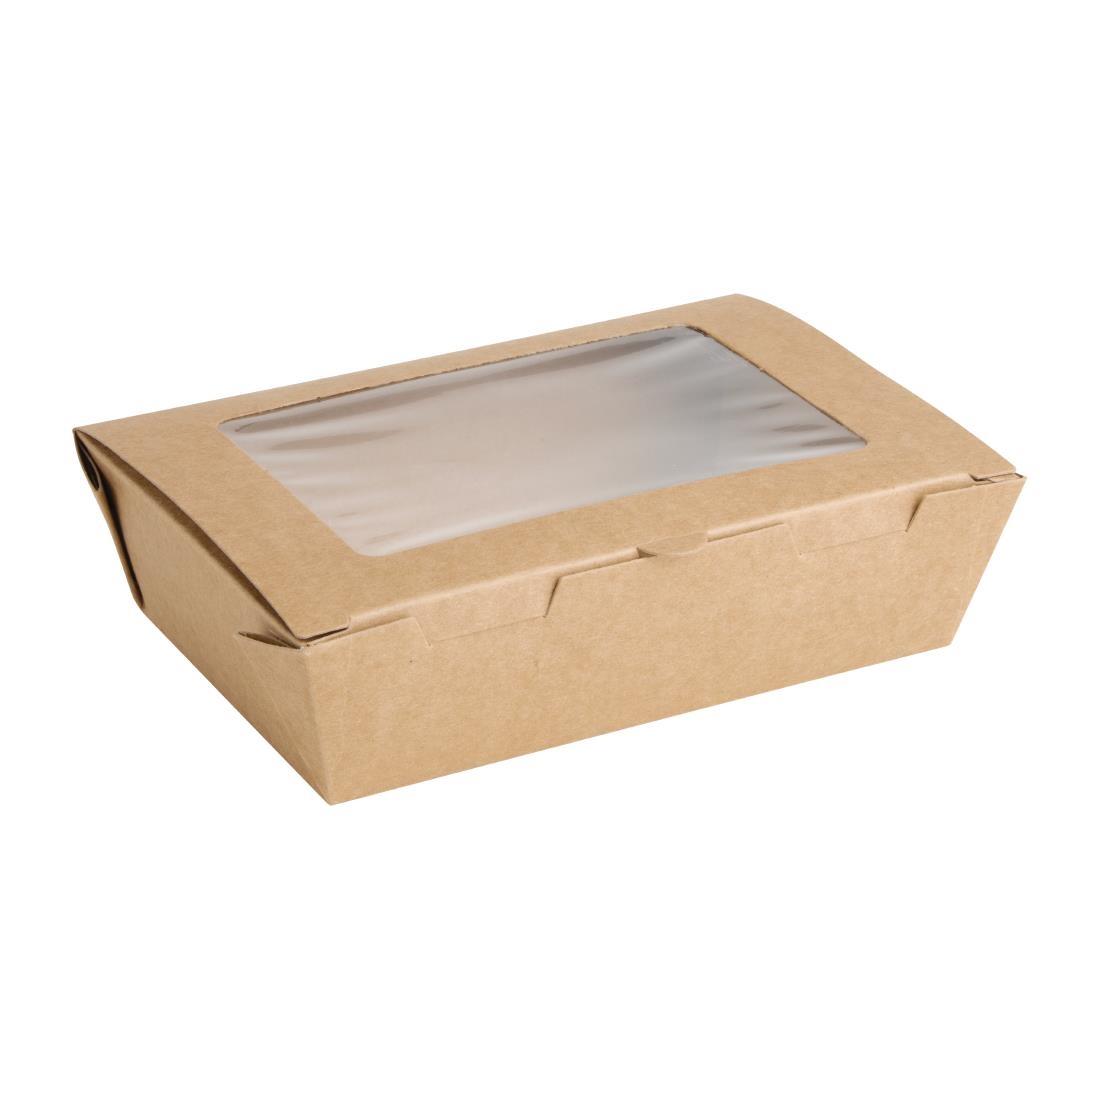 Fiesta Recyclable Salad Box with PET Window 700ml (Pack of 200) - FN897  - 1